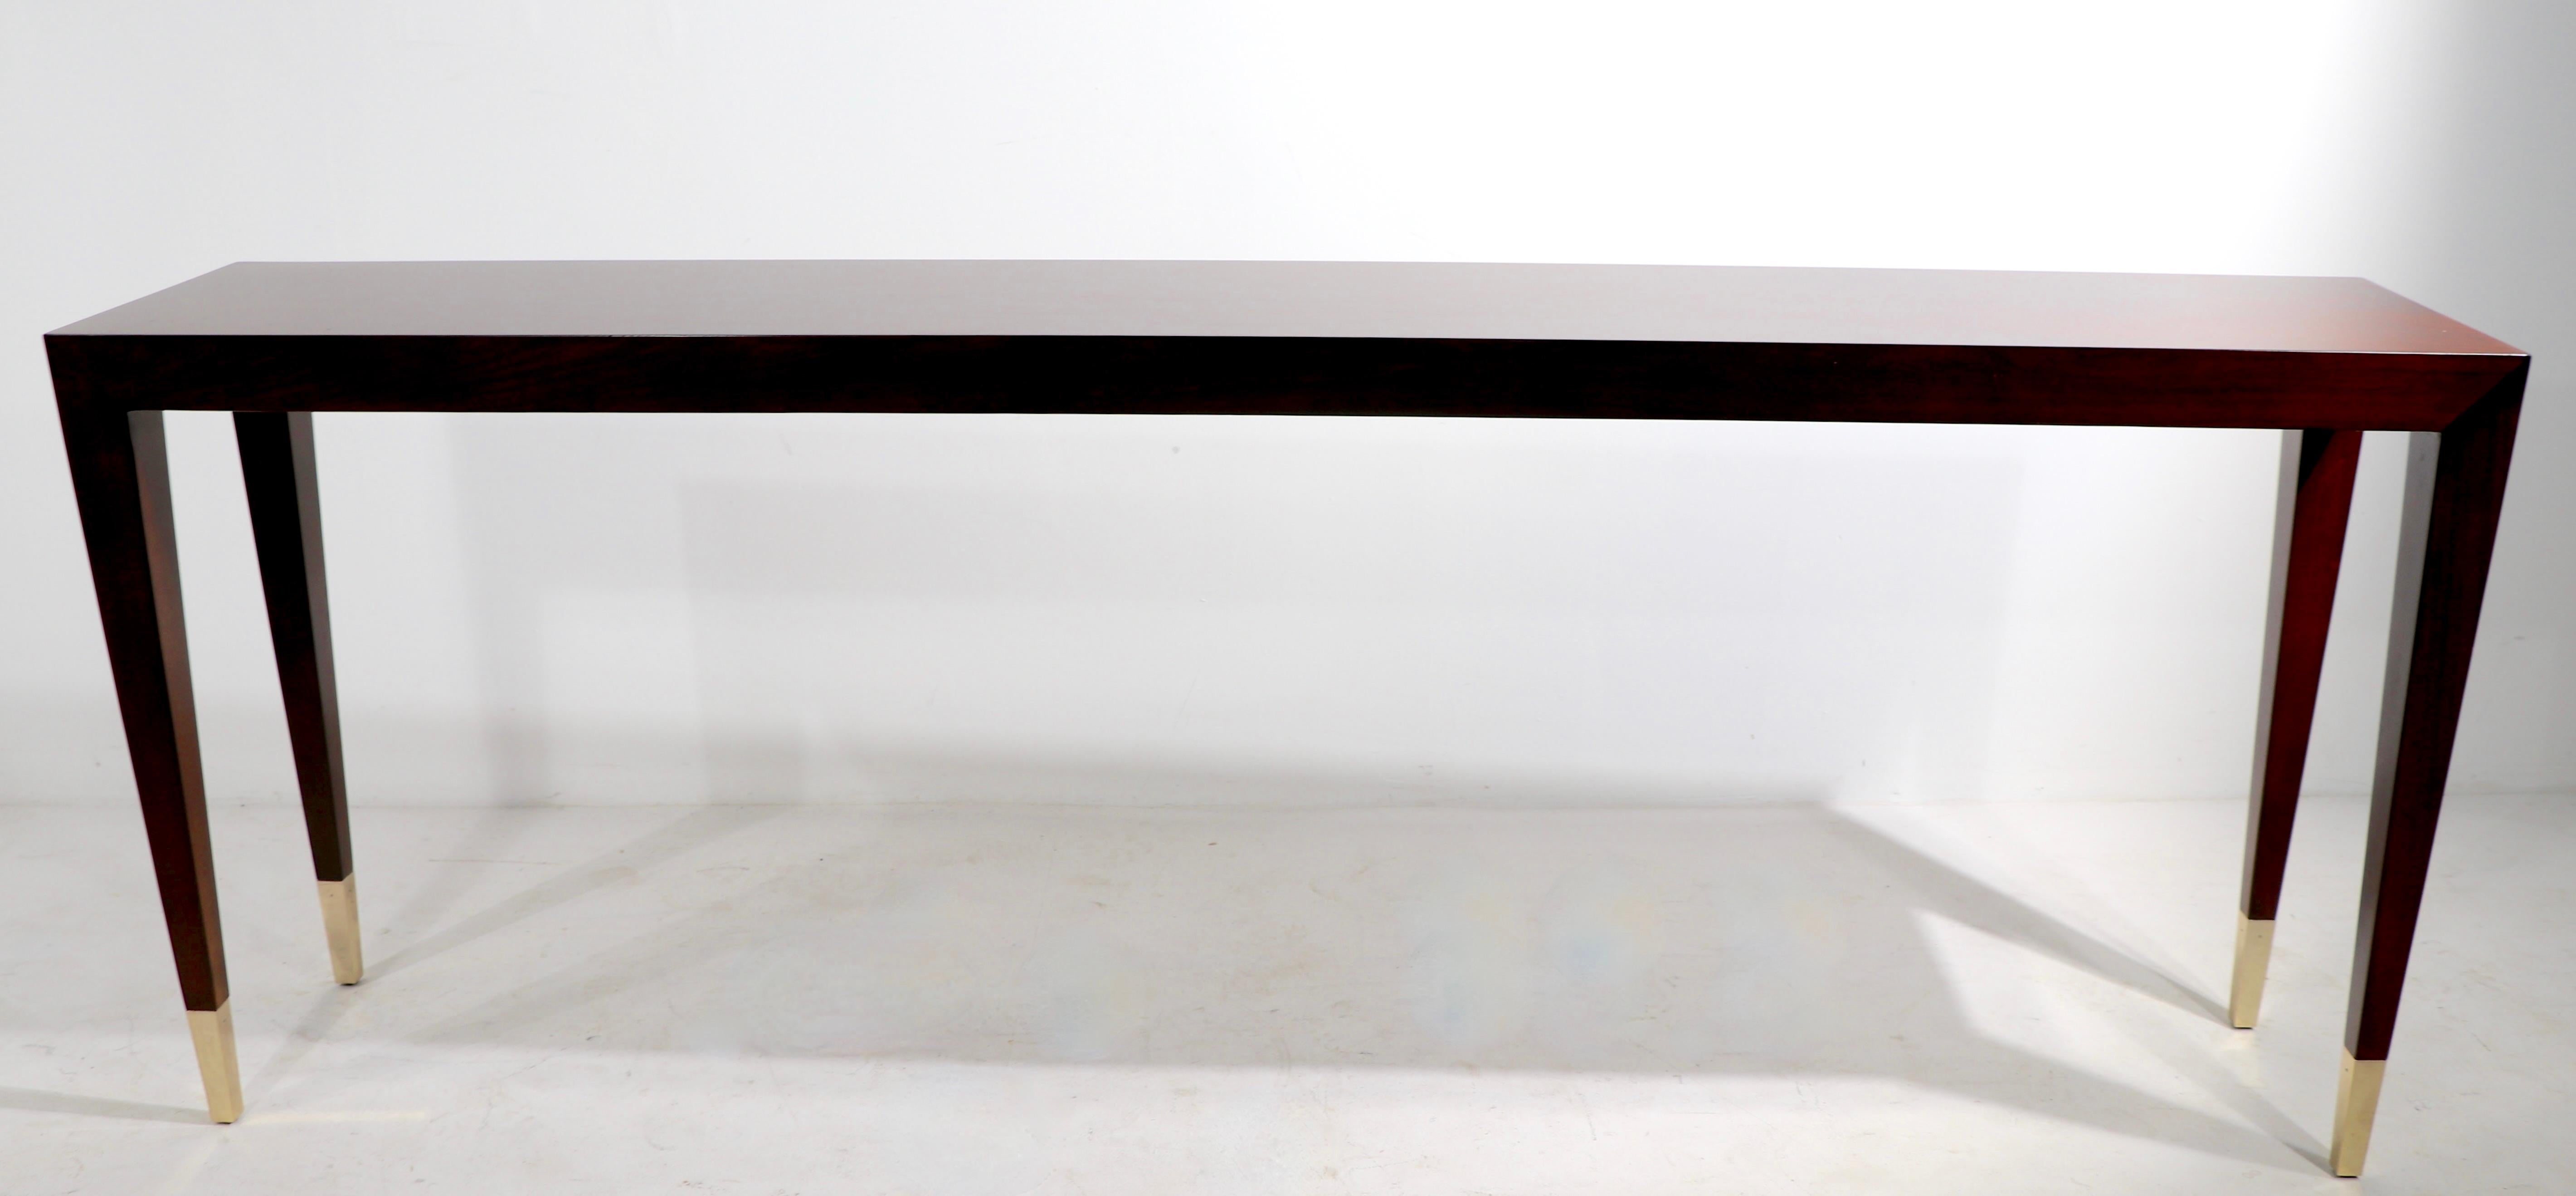 Brass Elegant Extra Long Console Table in the French Art Deco Style Marked Uovo